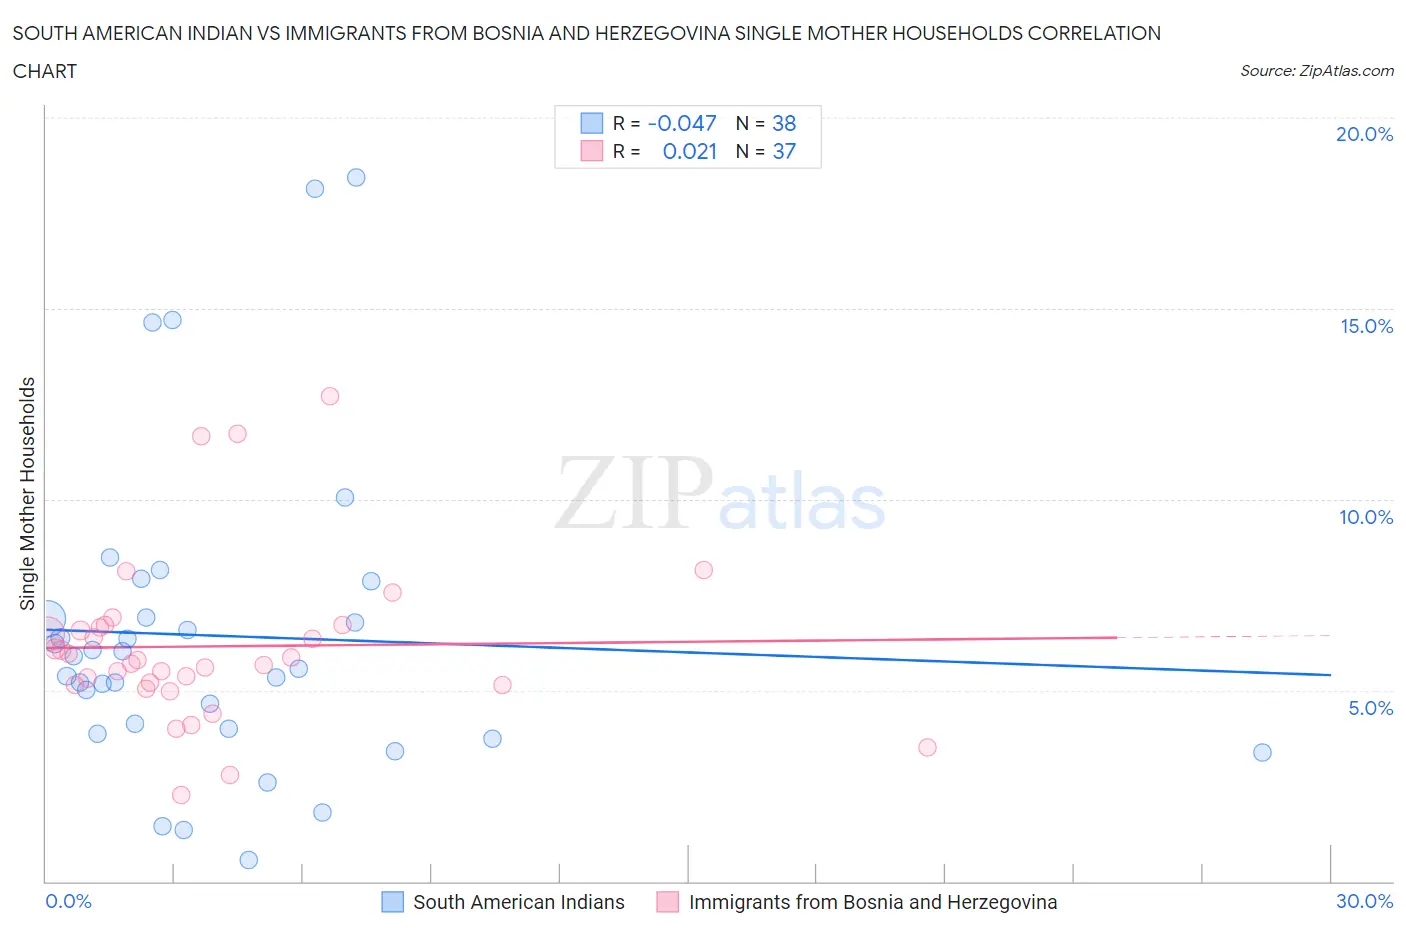 South American Indian vs Immigrants from Bosnia and Herzegovina Single Mother Households